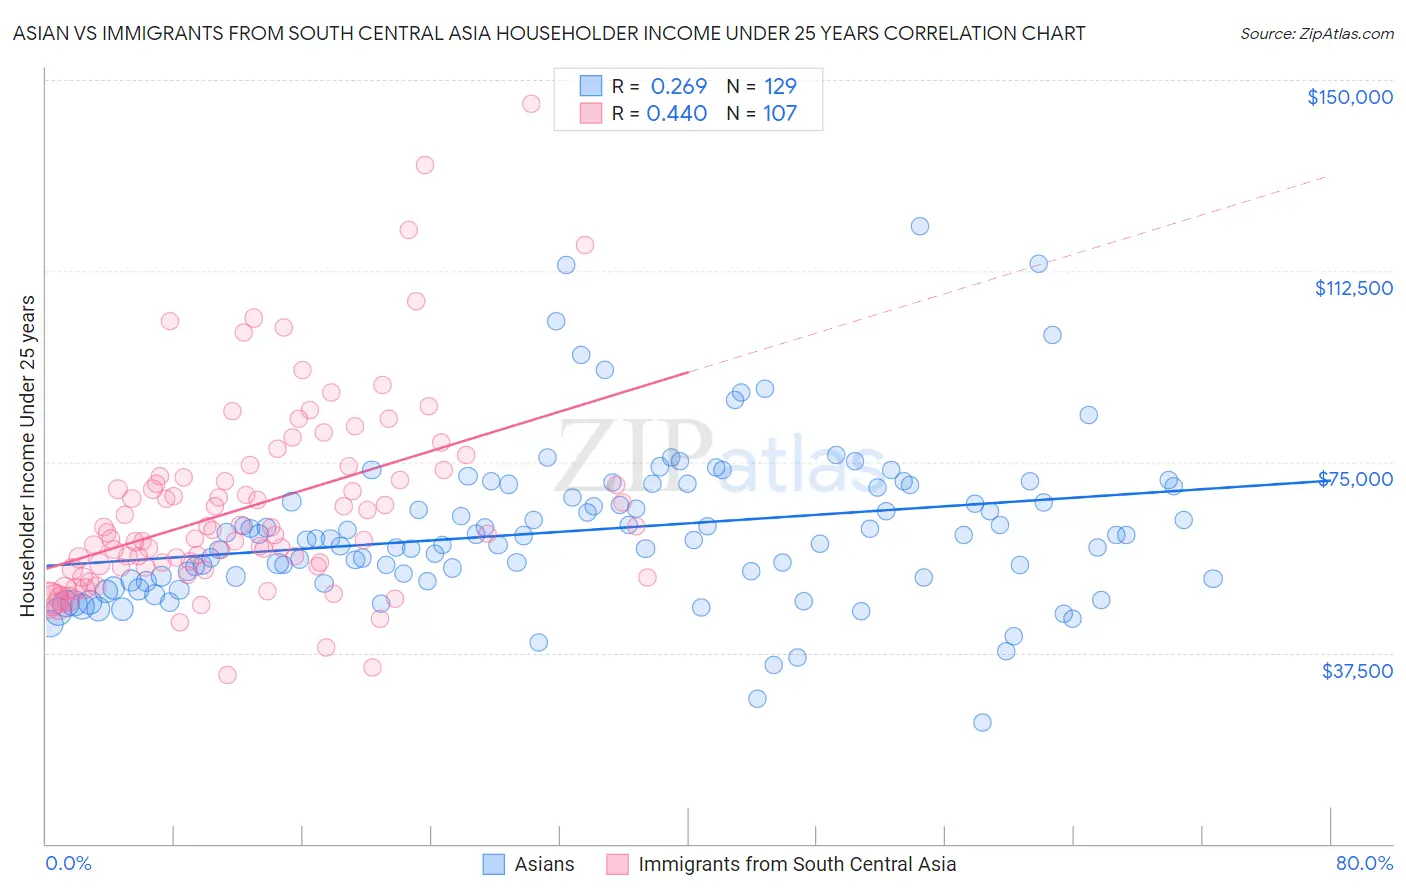 Asian vs Immigrants from South Central Asia Householder Income Under 25 years